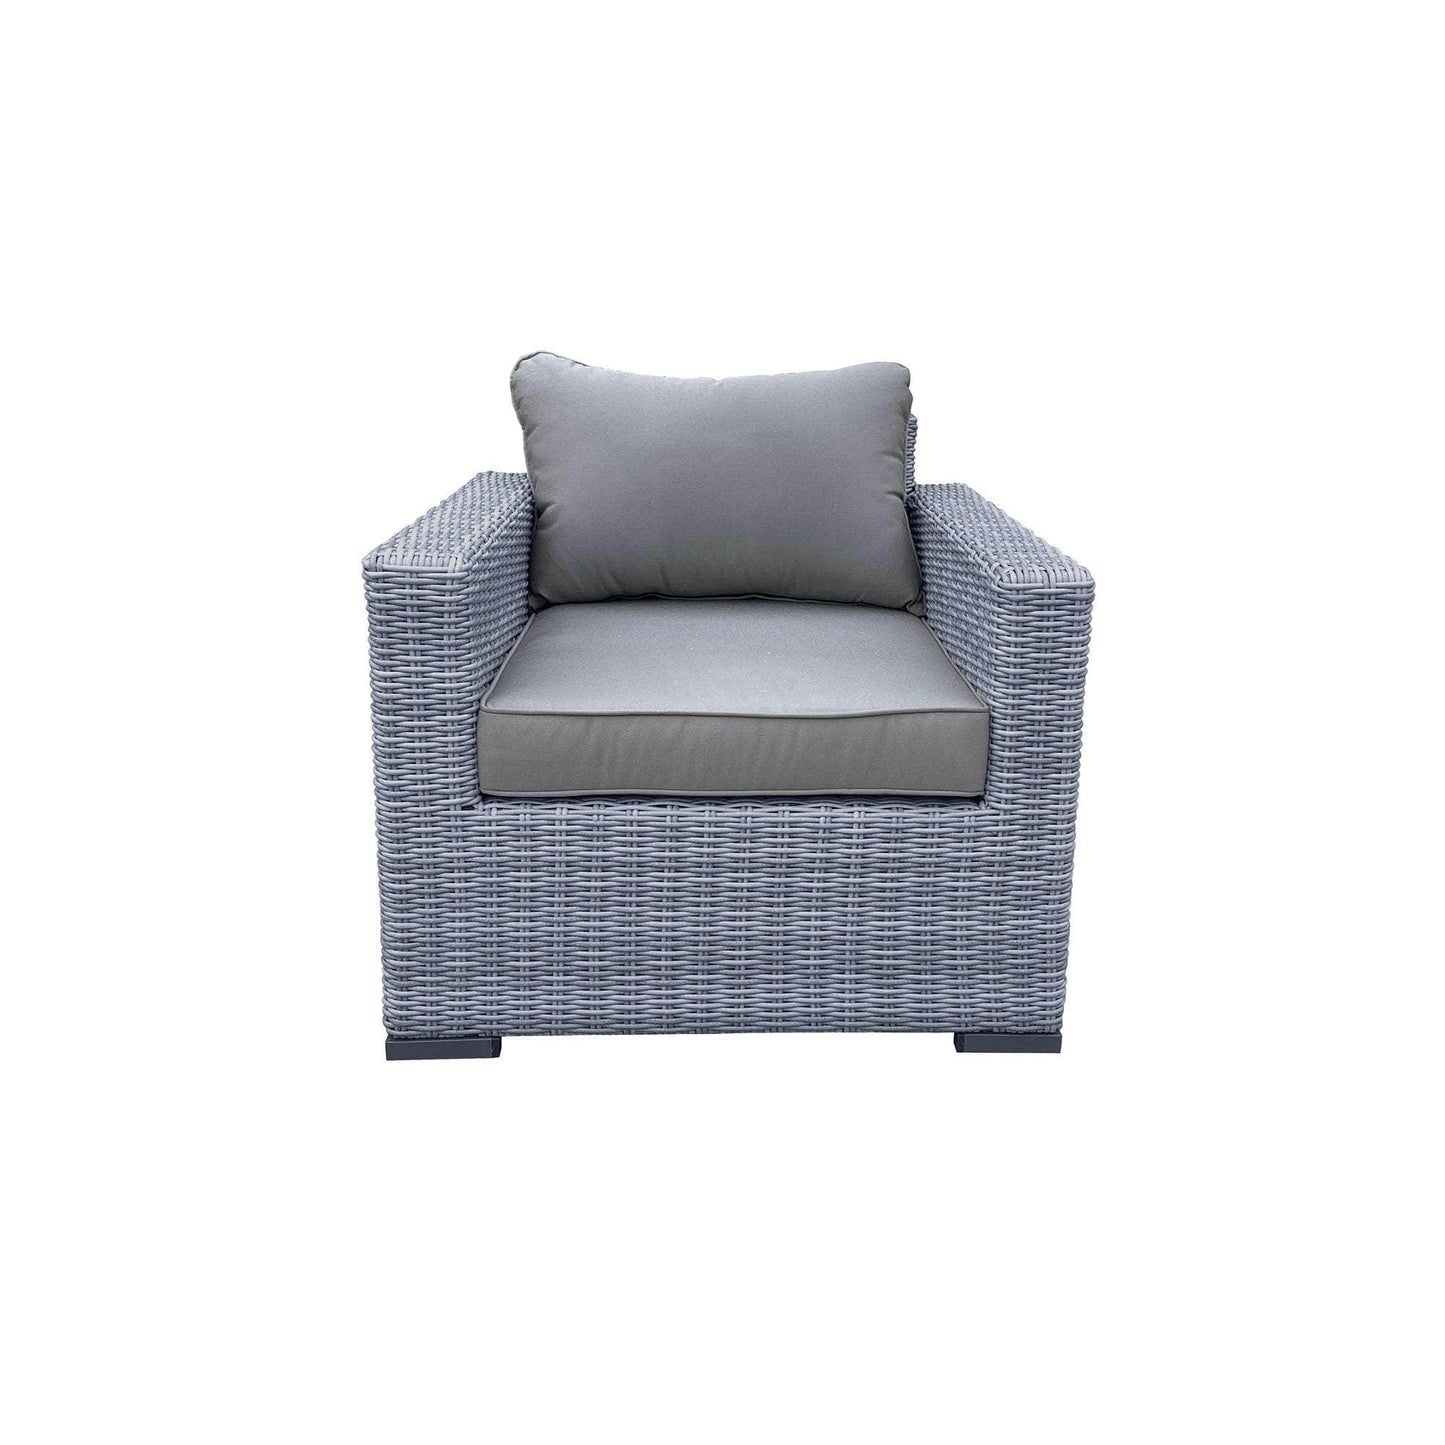 Pending - Cieux Canvas Charcoal Cannes Outdoor Patio Wicker Club Chair in Grey with Sunbrella Cushions - Available in 2 Colours